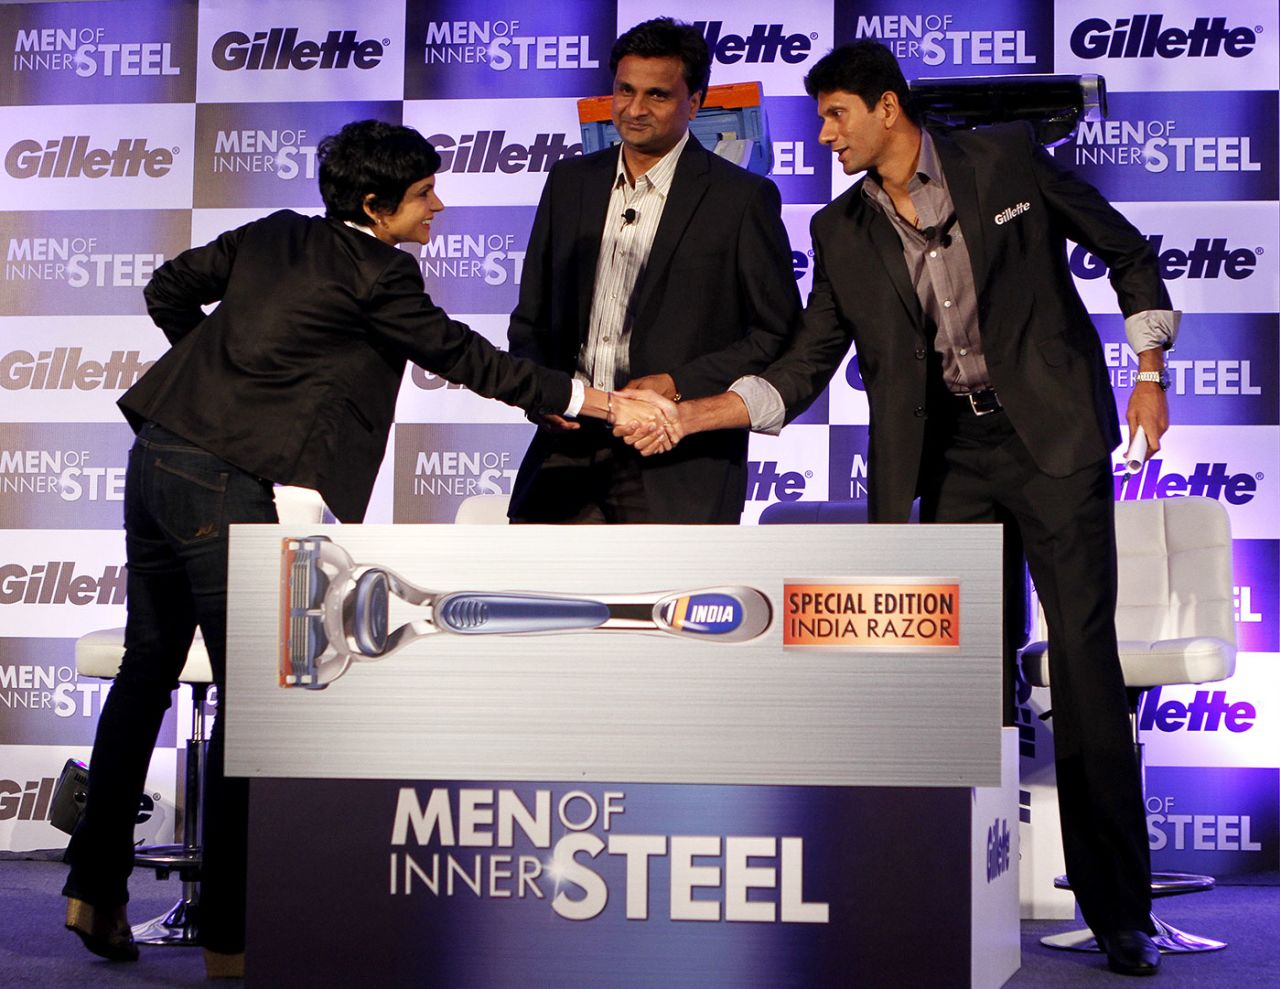 Actor Mandira Bedi with former Indian fast bowlers Javagal Srinath (centre) and Venkatesh Prasad at a product launch, New Delhi, April 22, 2014